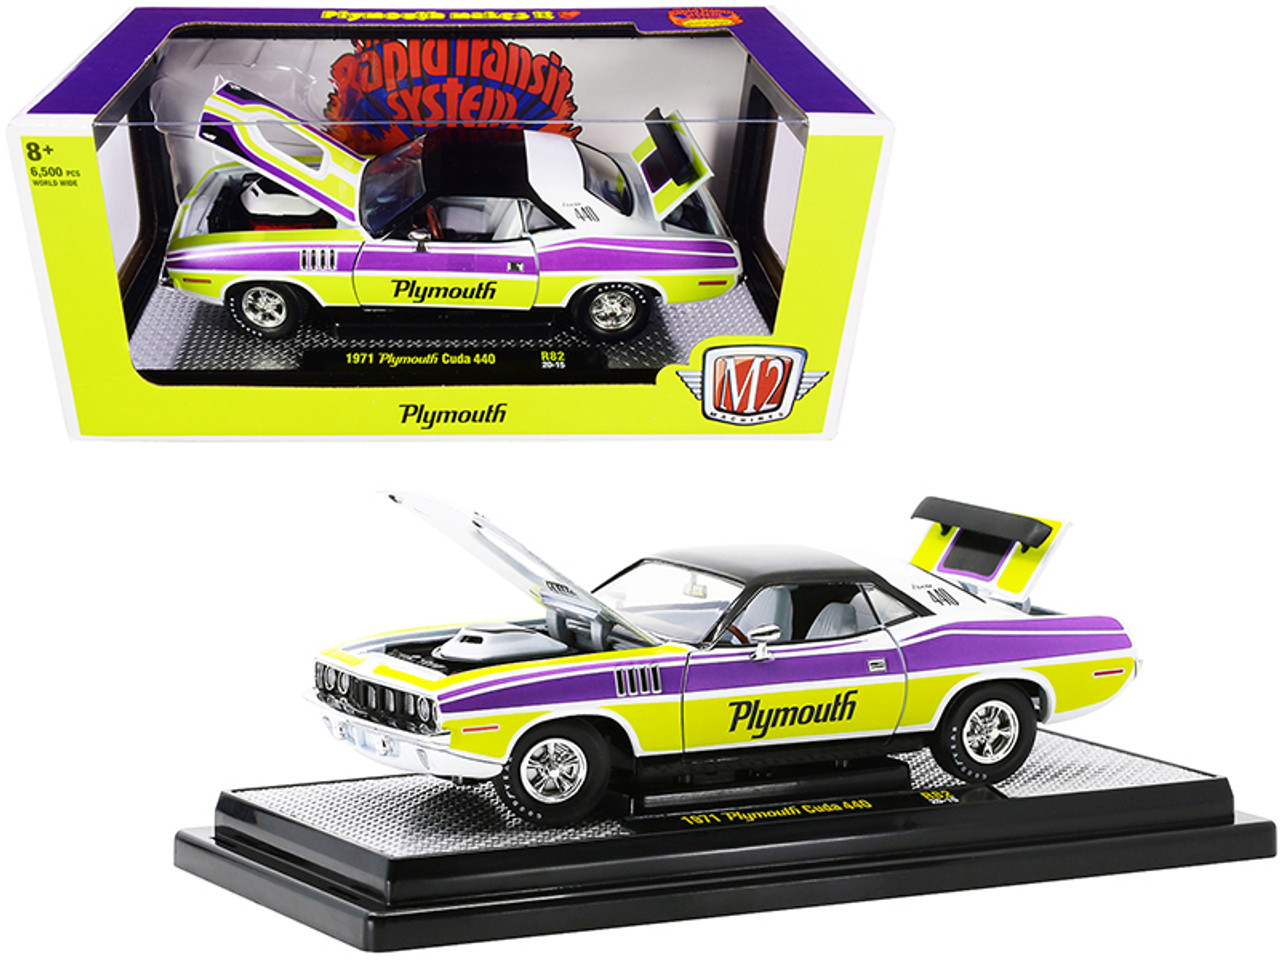 1971 Plymouth Barracuda 440 Pearl White and Black with Curious Yellow and Violet-Metallic Stripes Limited Edition to 6500 pieces Worldwide 1/24 Diecast Model Car by M2 Machines